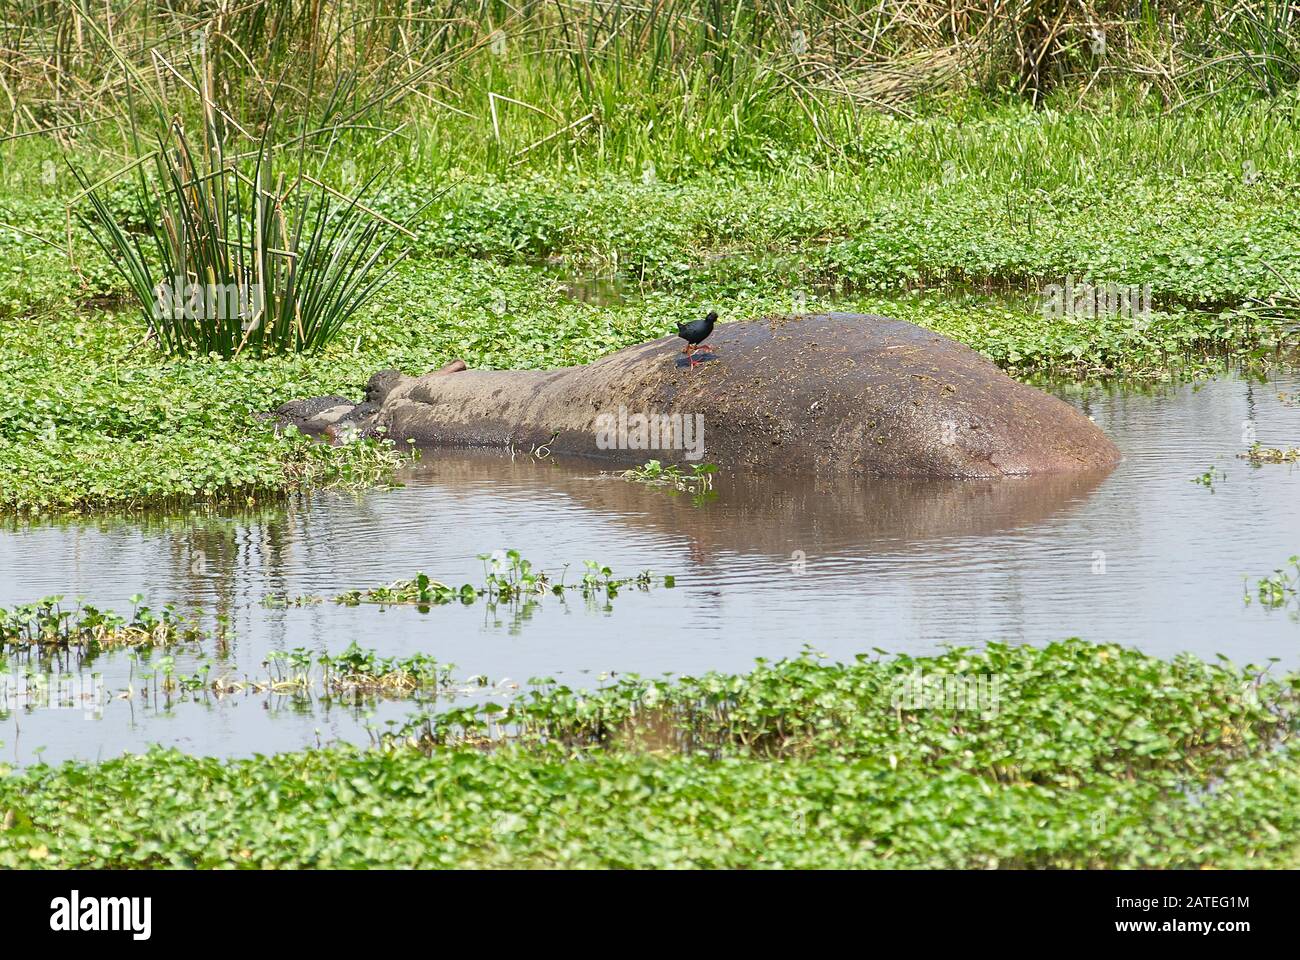 A Hippopotamus chilling out in water hole, covered with hyacinths Stock Photo